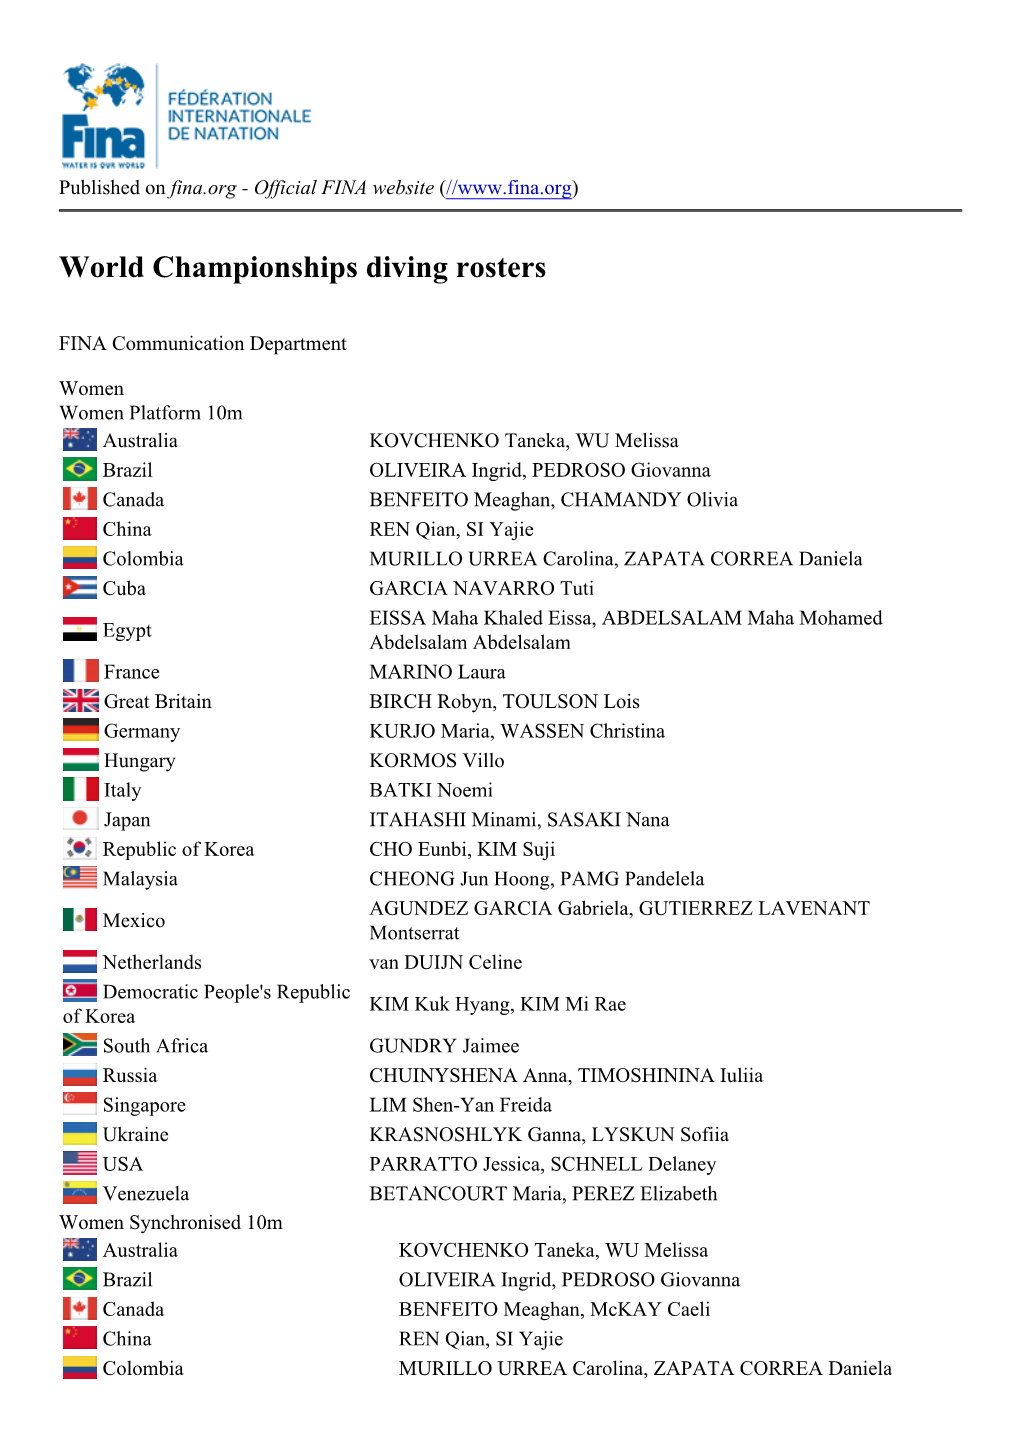 World Championships Diving Rosters